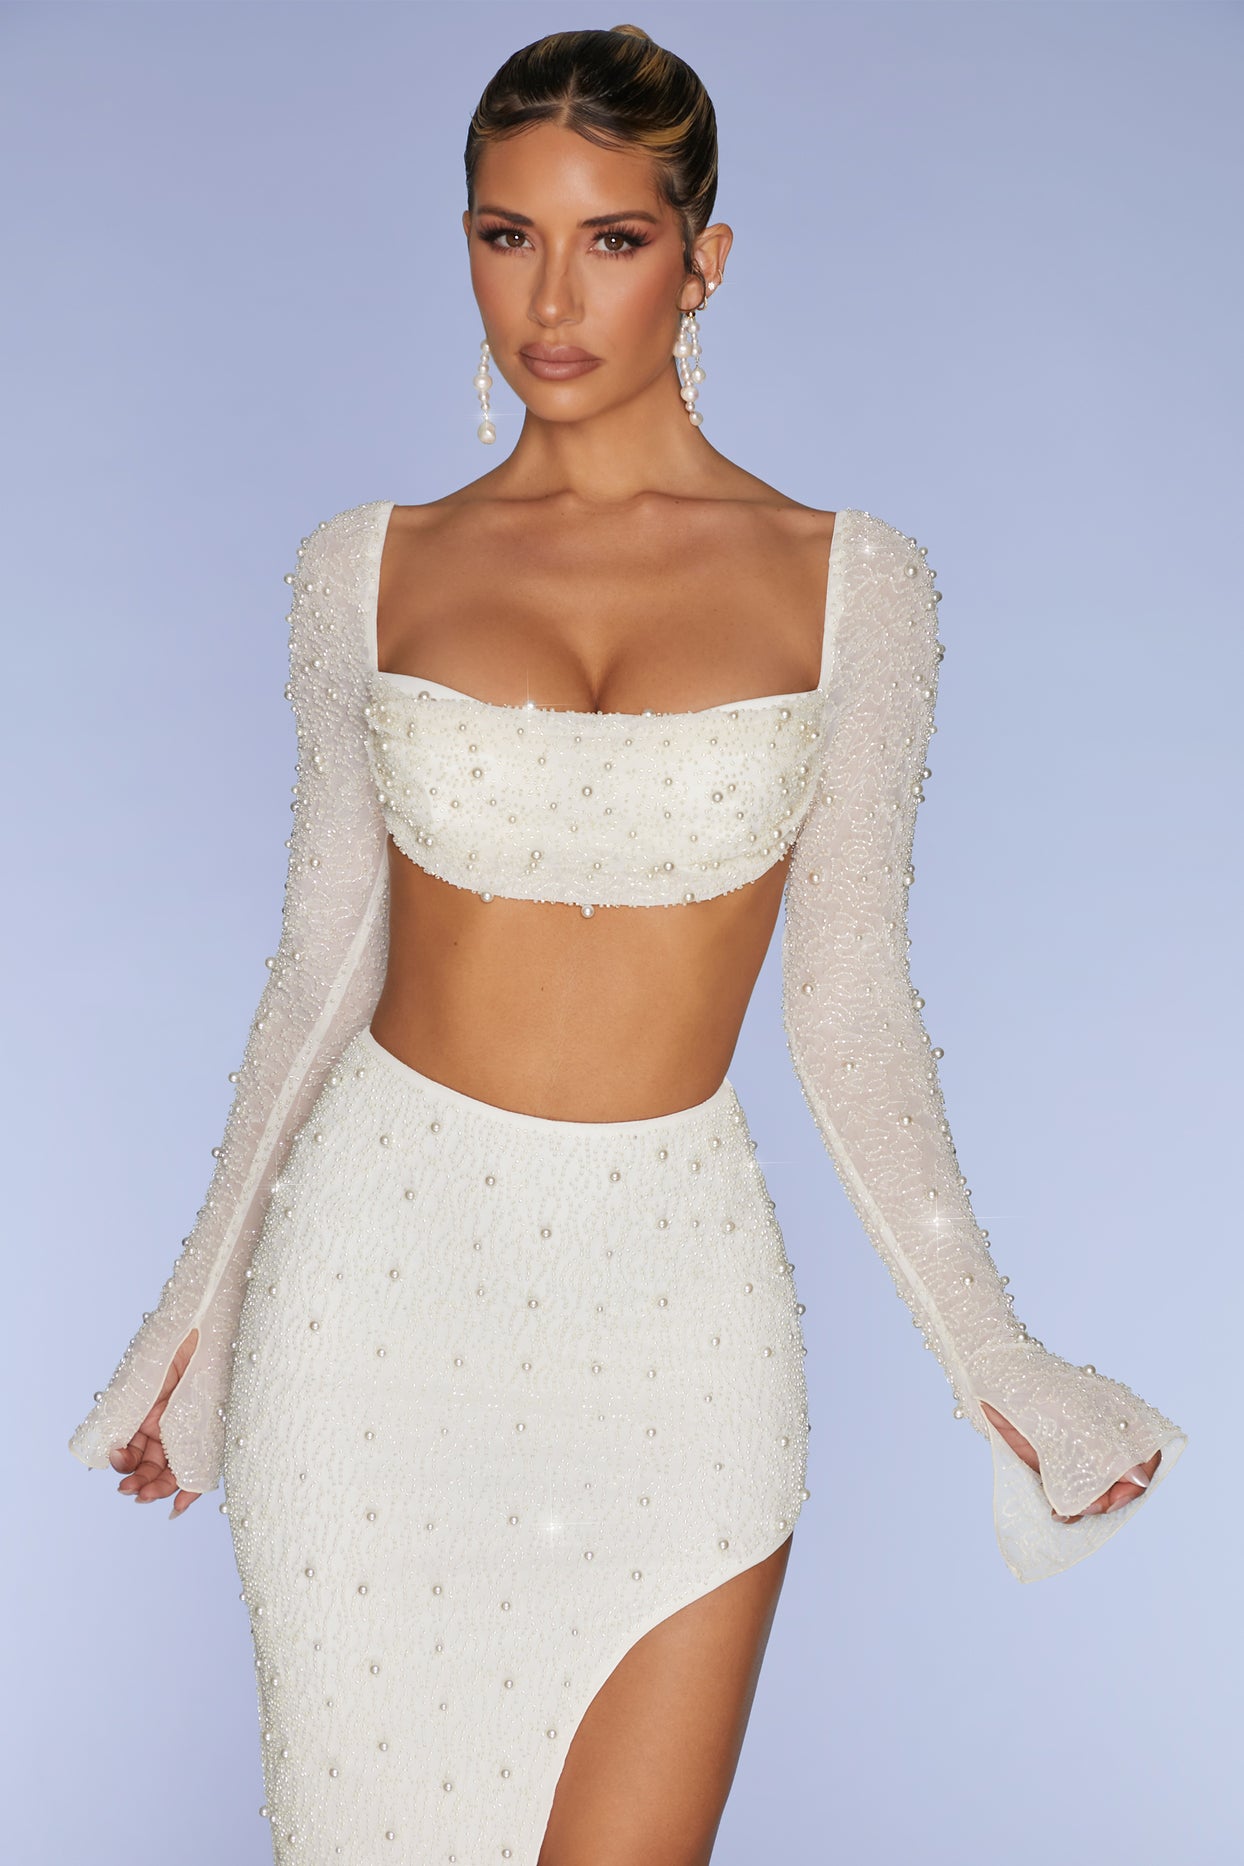 Ivory Pearl Beaded Crop Top // Heavily Embellished Top W/ Cream Faux Pearls  -  Norway